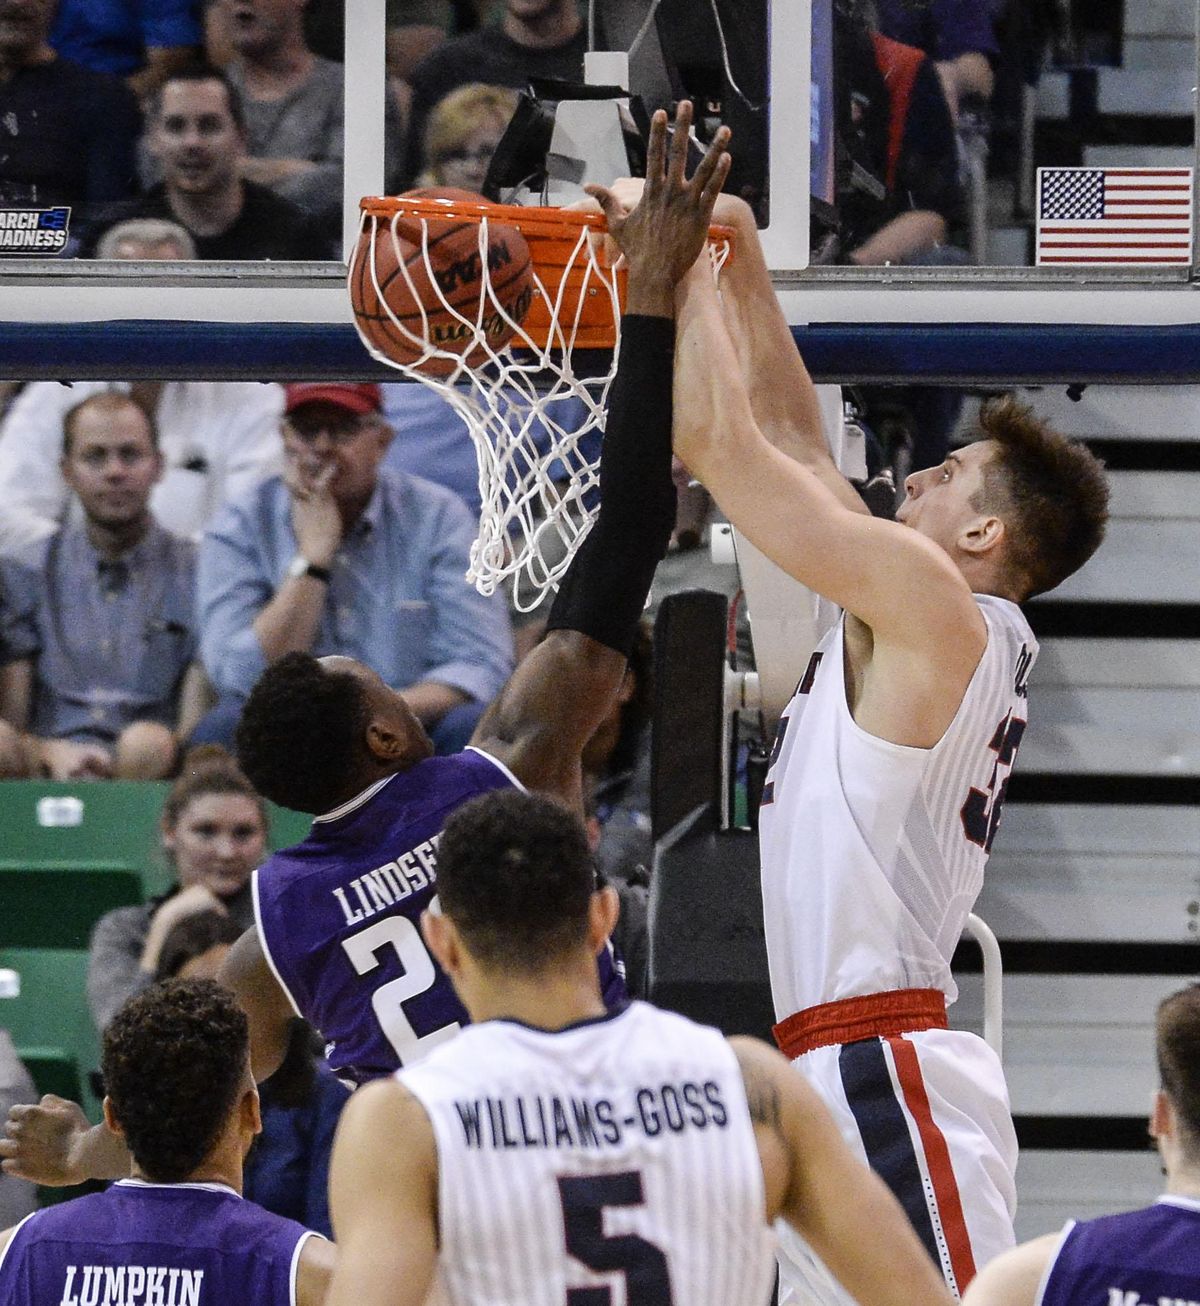 Gonzaga forward Zach Collins slams on Northwestern forward Scottie Lindsey during their NCAA second round game, March 18, 2017, in Salt Lake City. (Dan Pelle / The Spokesman-Review)